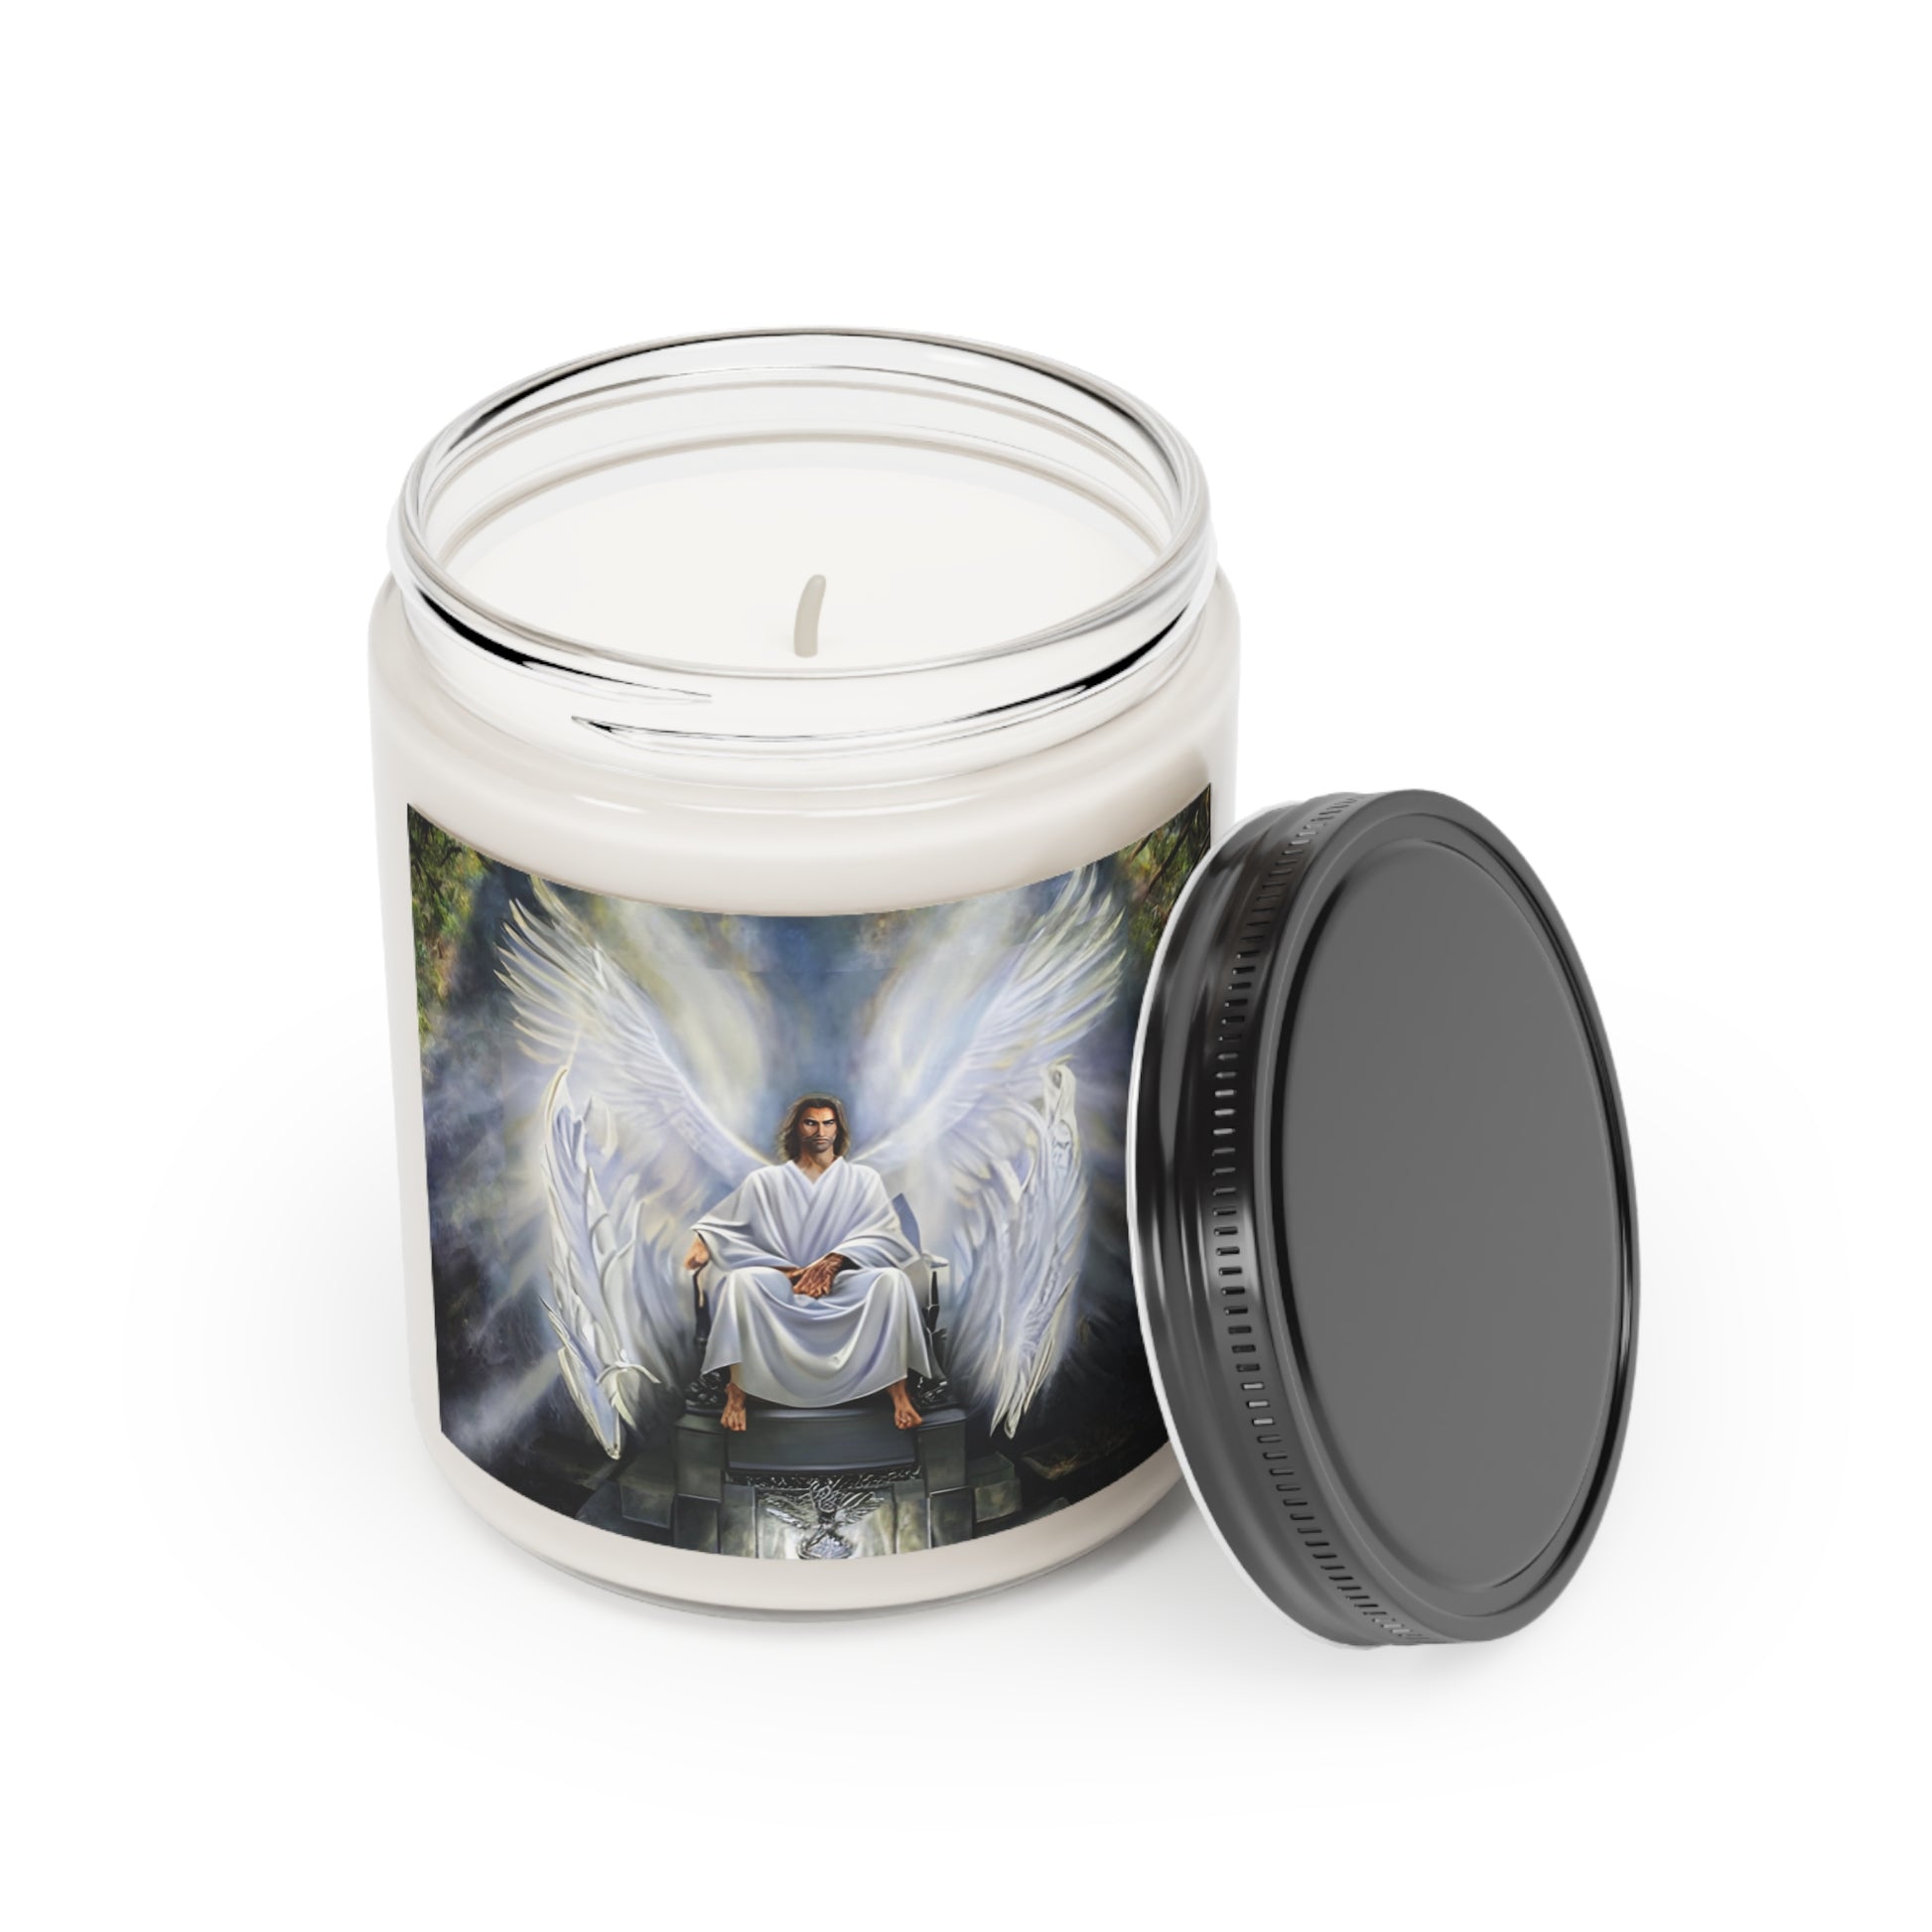 Archangel Samael Scented Candle for offerings, rituals, initiations or praying and meditation - Angelic Thrones: Your Gateway to the Angelic Realms